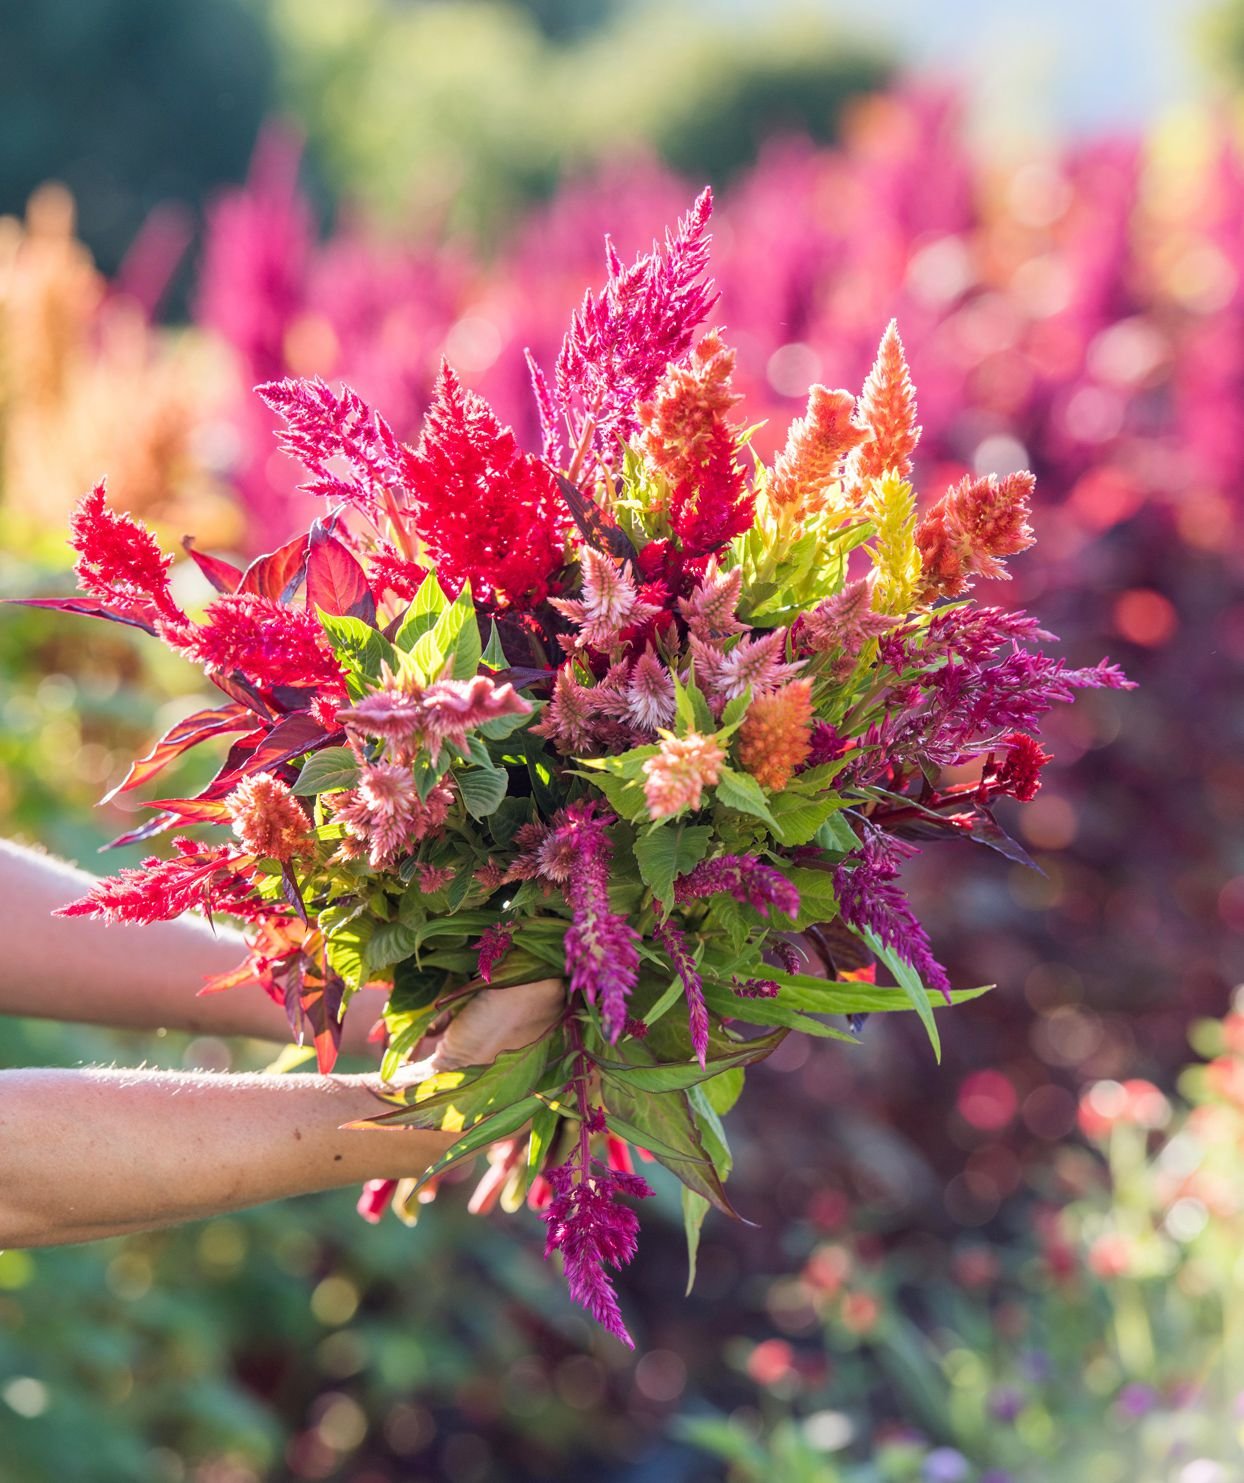 Want to Grow Flowers from Seed? Start with These 15 Easy Annuals